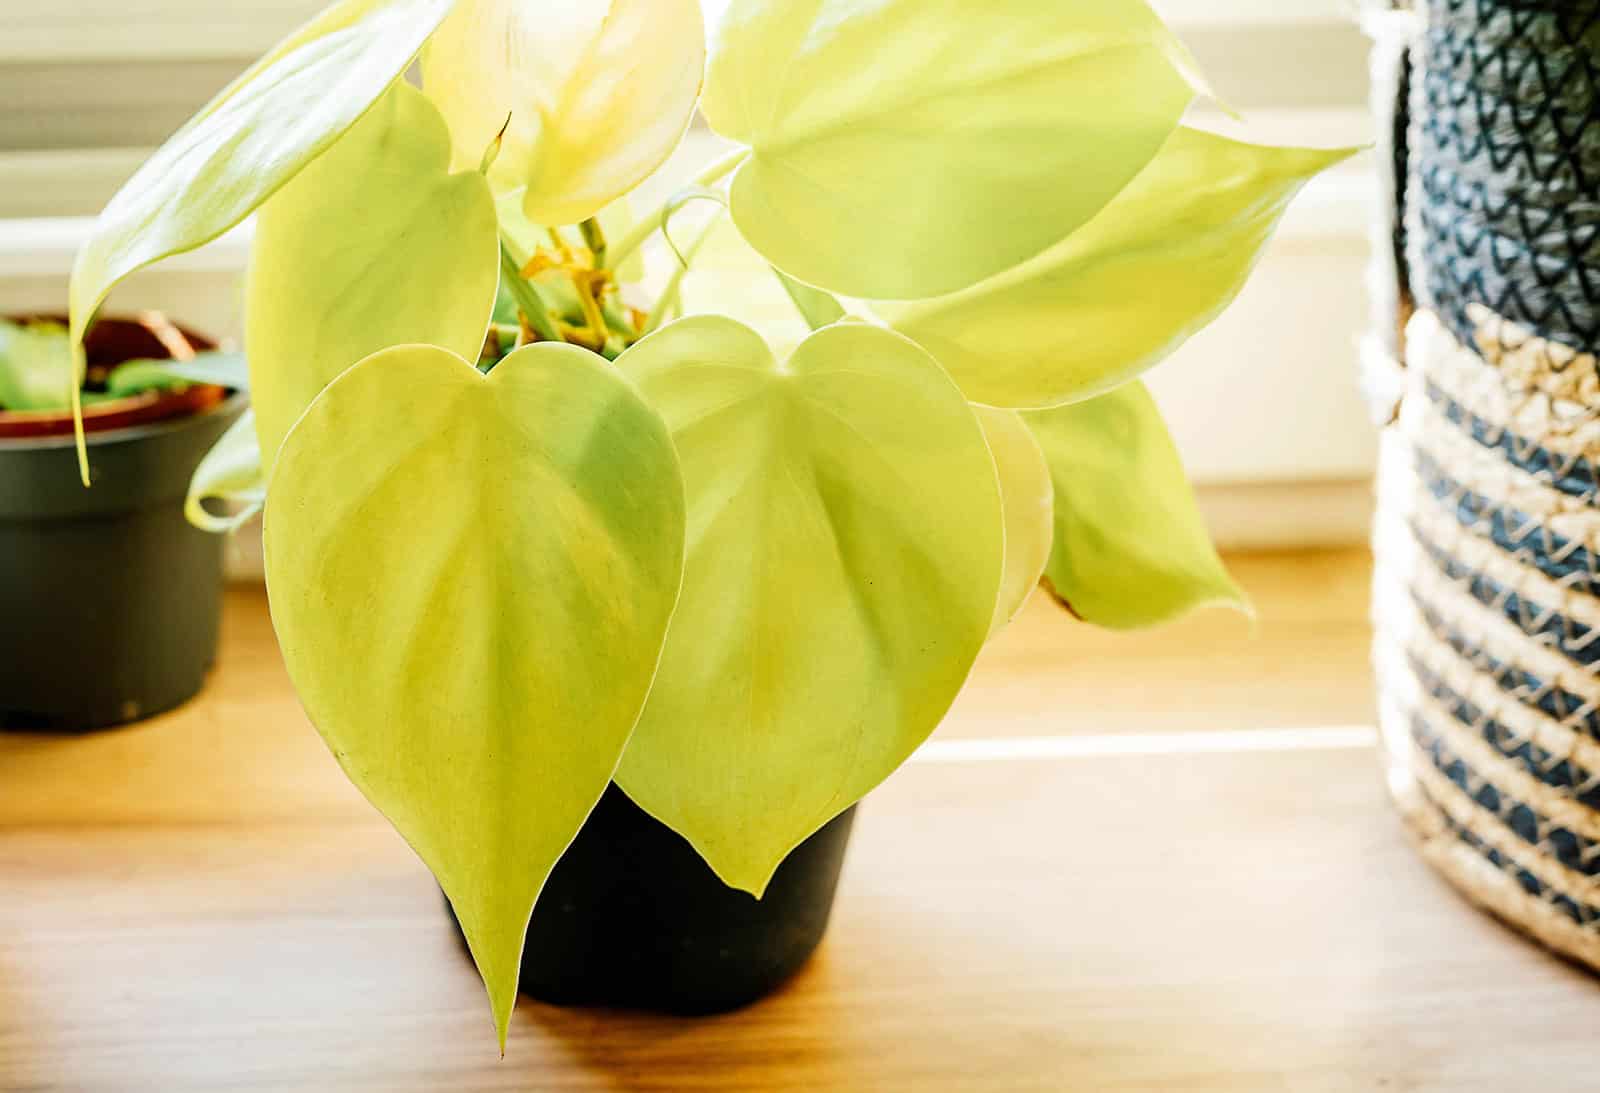 A small Philodendron 'Lemon Lime' houseplant in a black pot, shot on a wooden table with a woven basket next to it